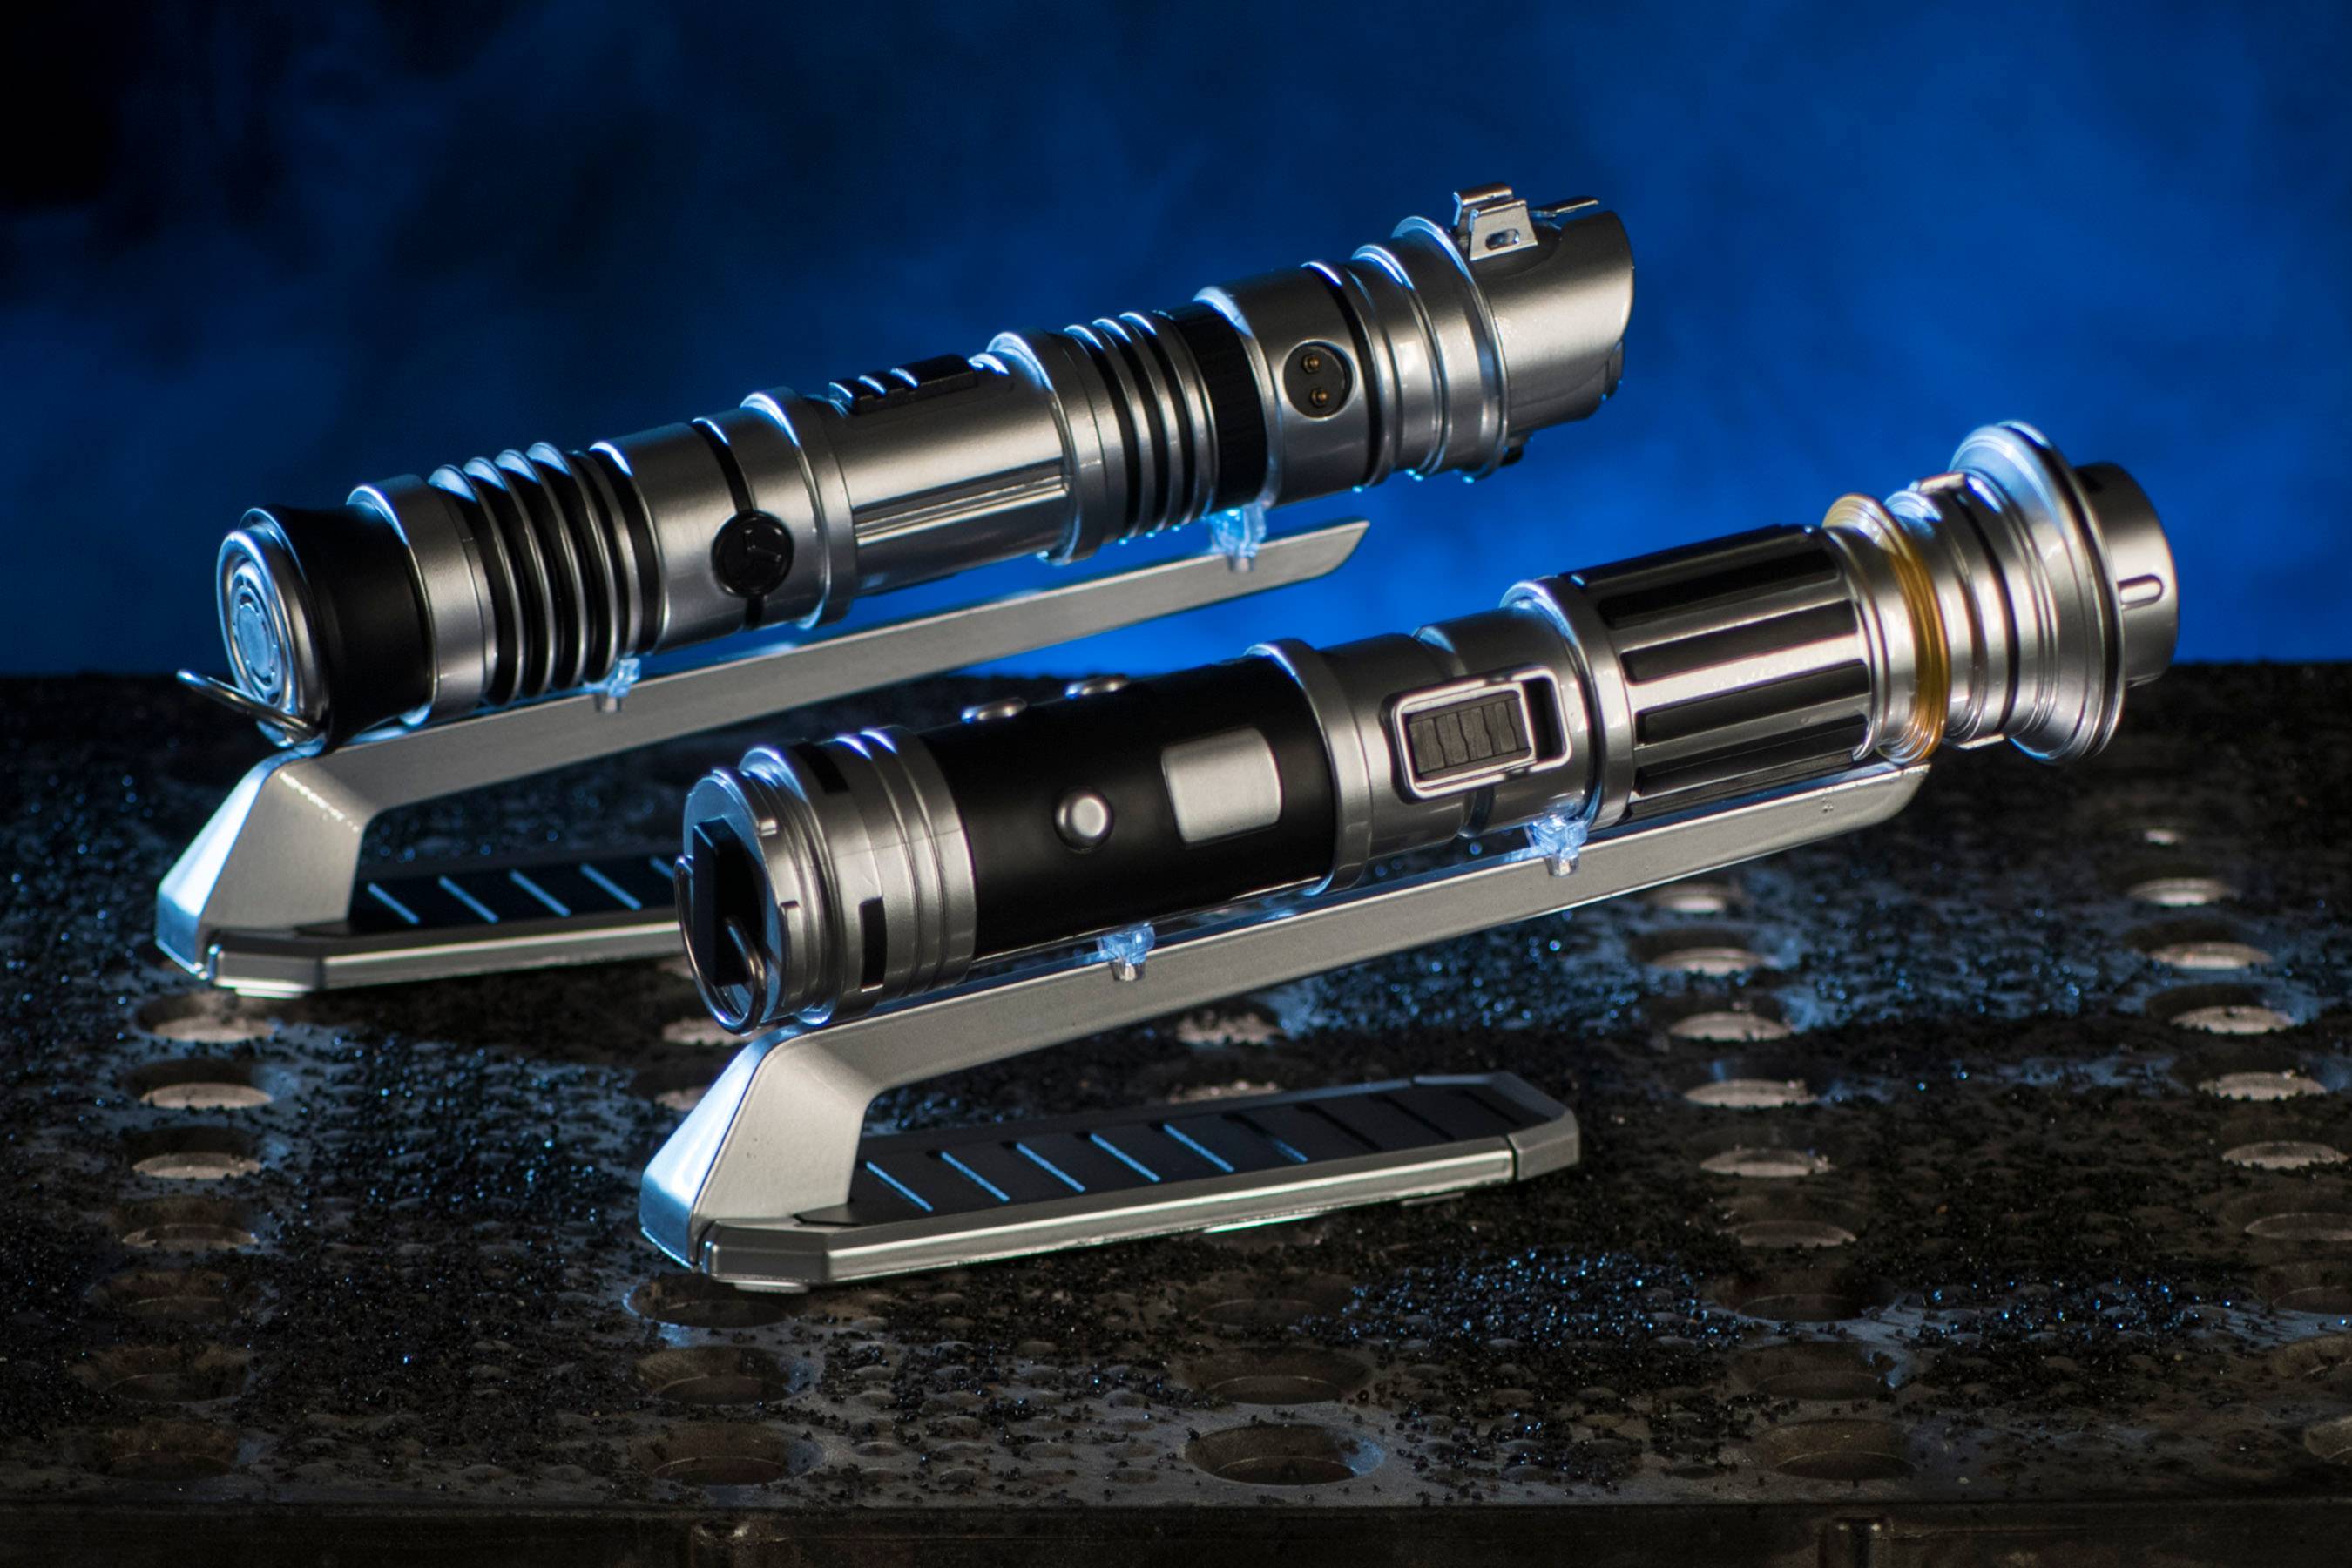 Hefty price increases at Savi's Workshop Lightsabers and Droid Depot in Star Wars Galaxy's Edge at Disney's Hollywood Studios